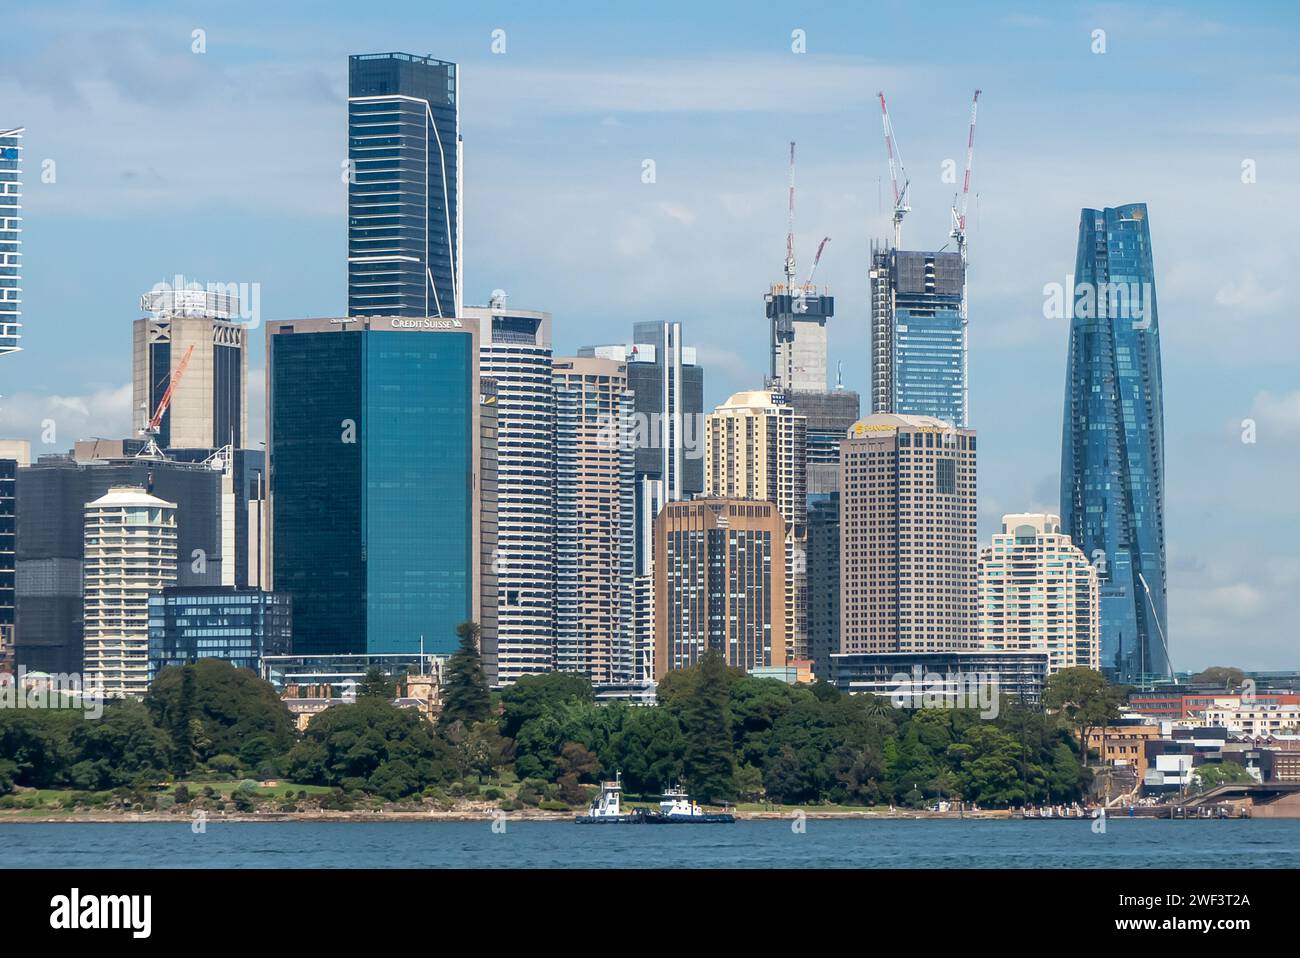 Sydney in Australia: the harbour and skyline Stock Photo